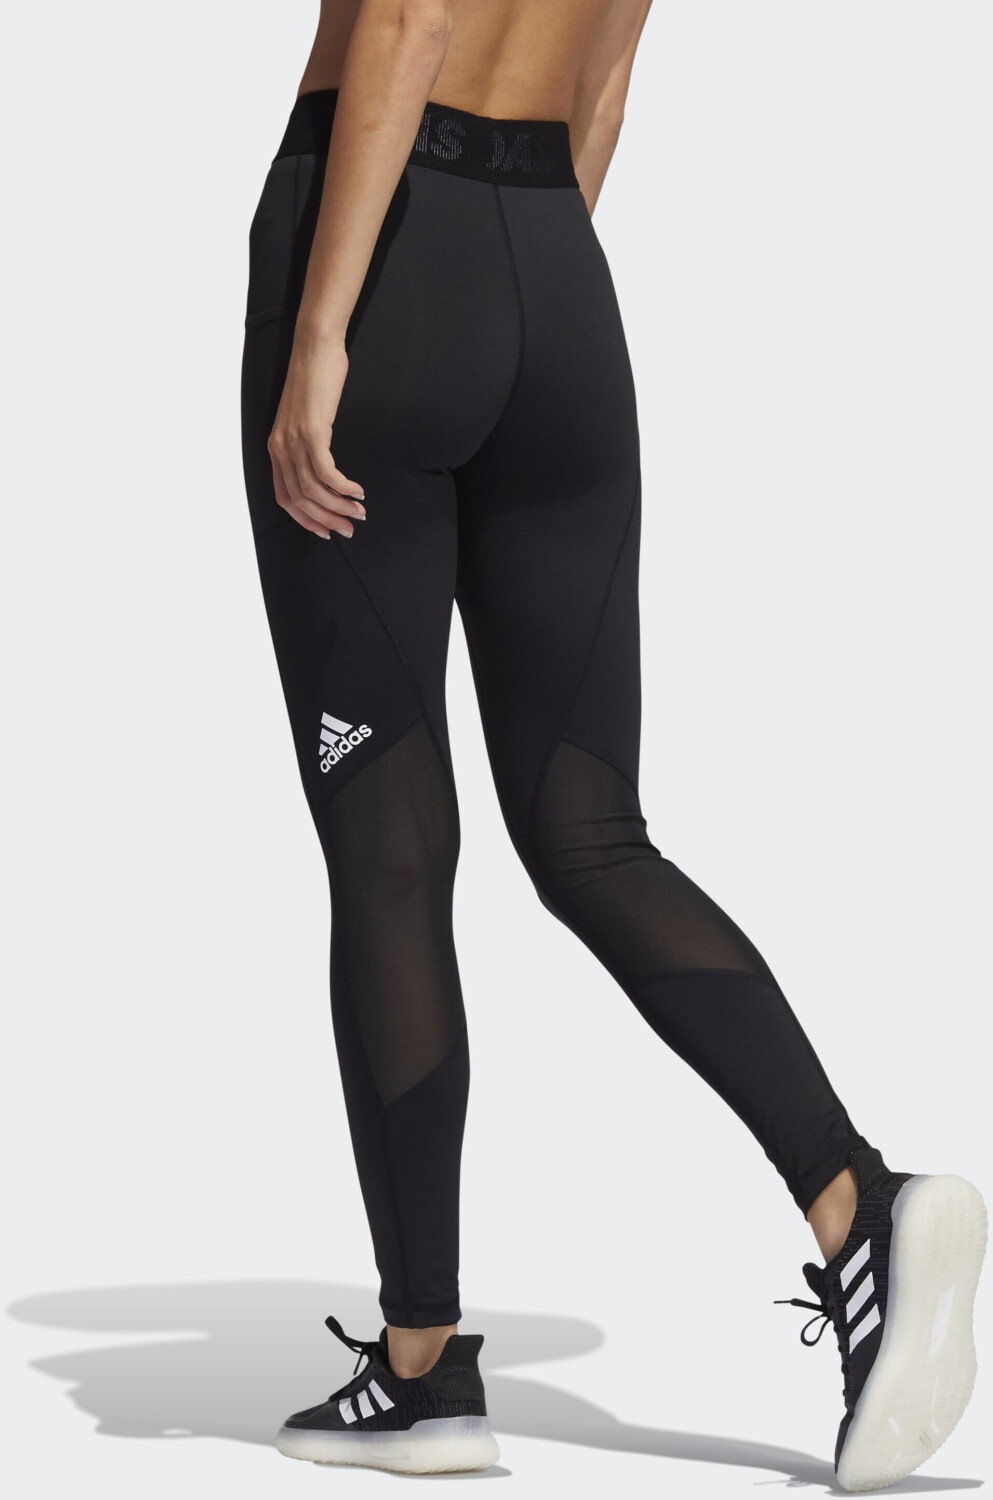 Buy Adidas Techfit Badge of Sport Tight Women (GL0693) from £24.99